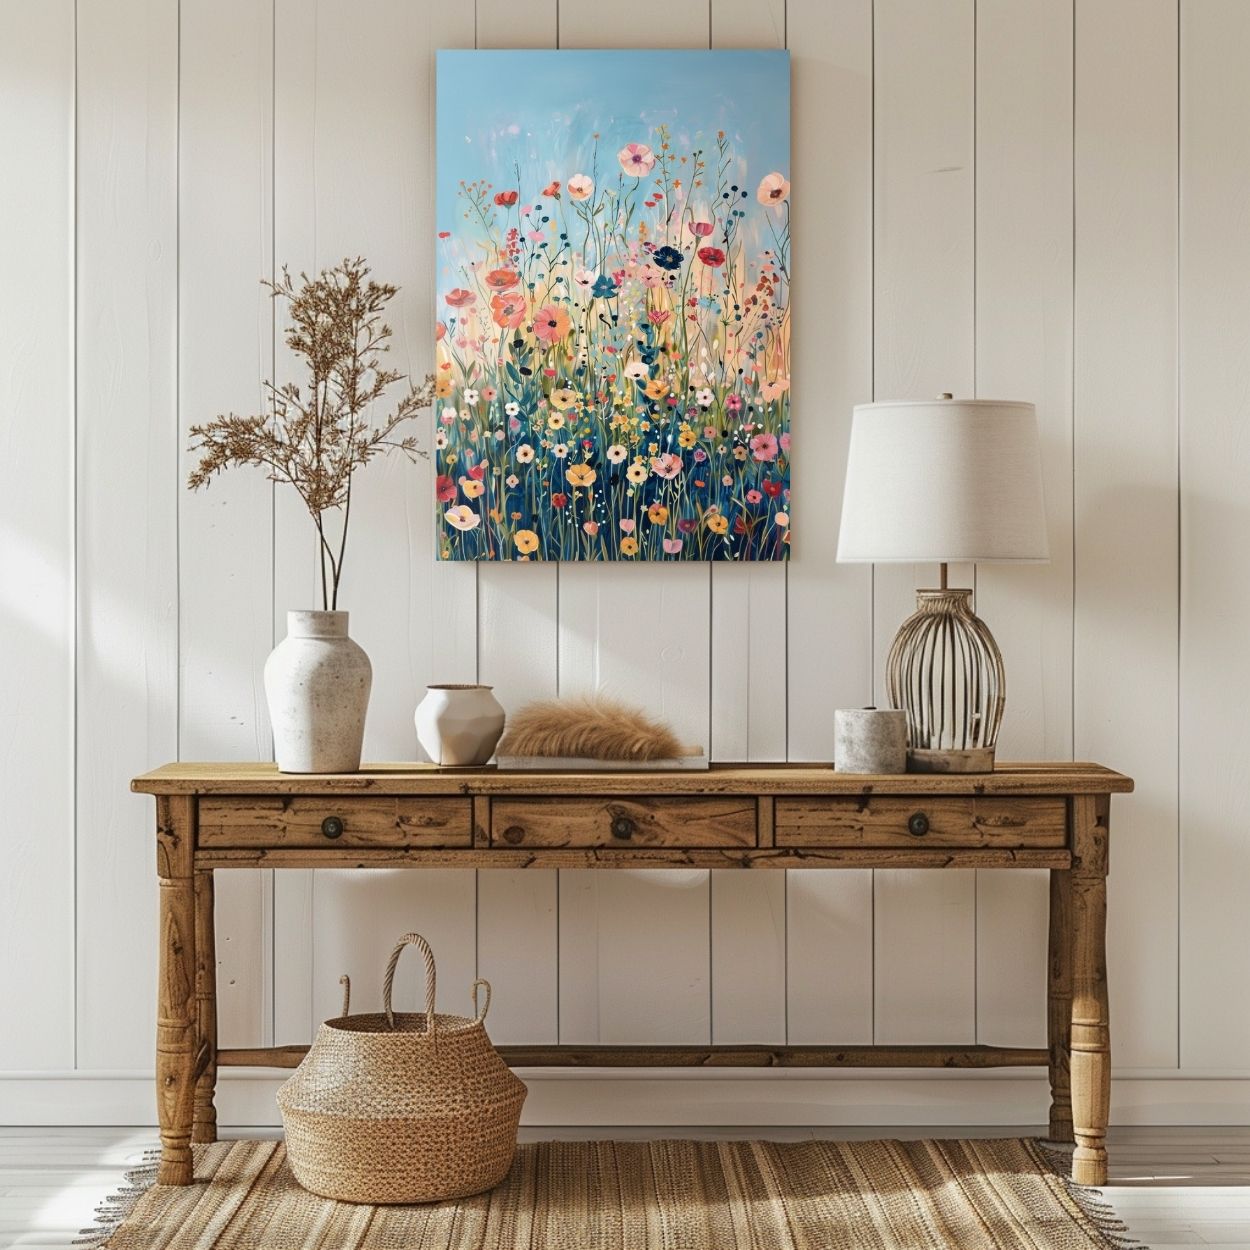 Product image showing canvas wall art of Wildflower Symphony - A Meadow of Lush Vibrant Blooms in a hallway.